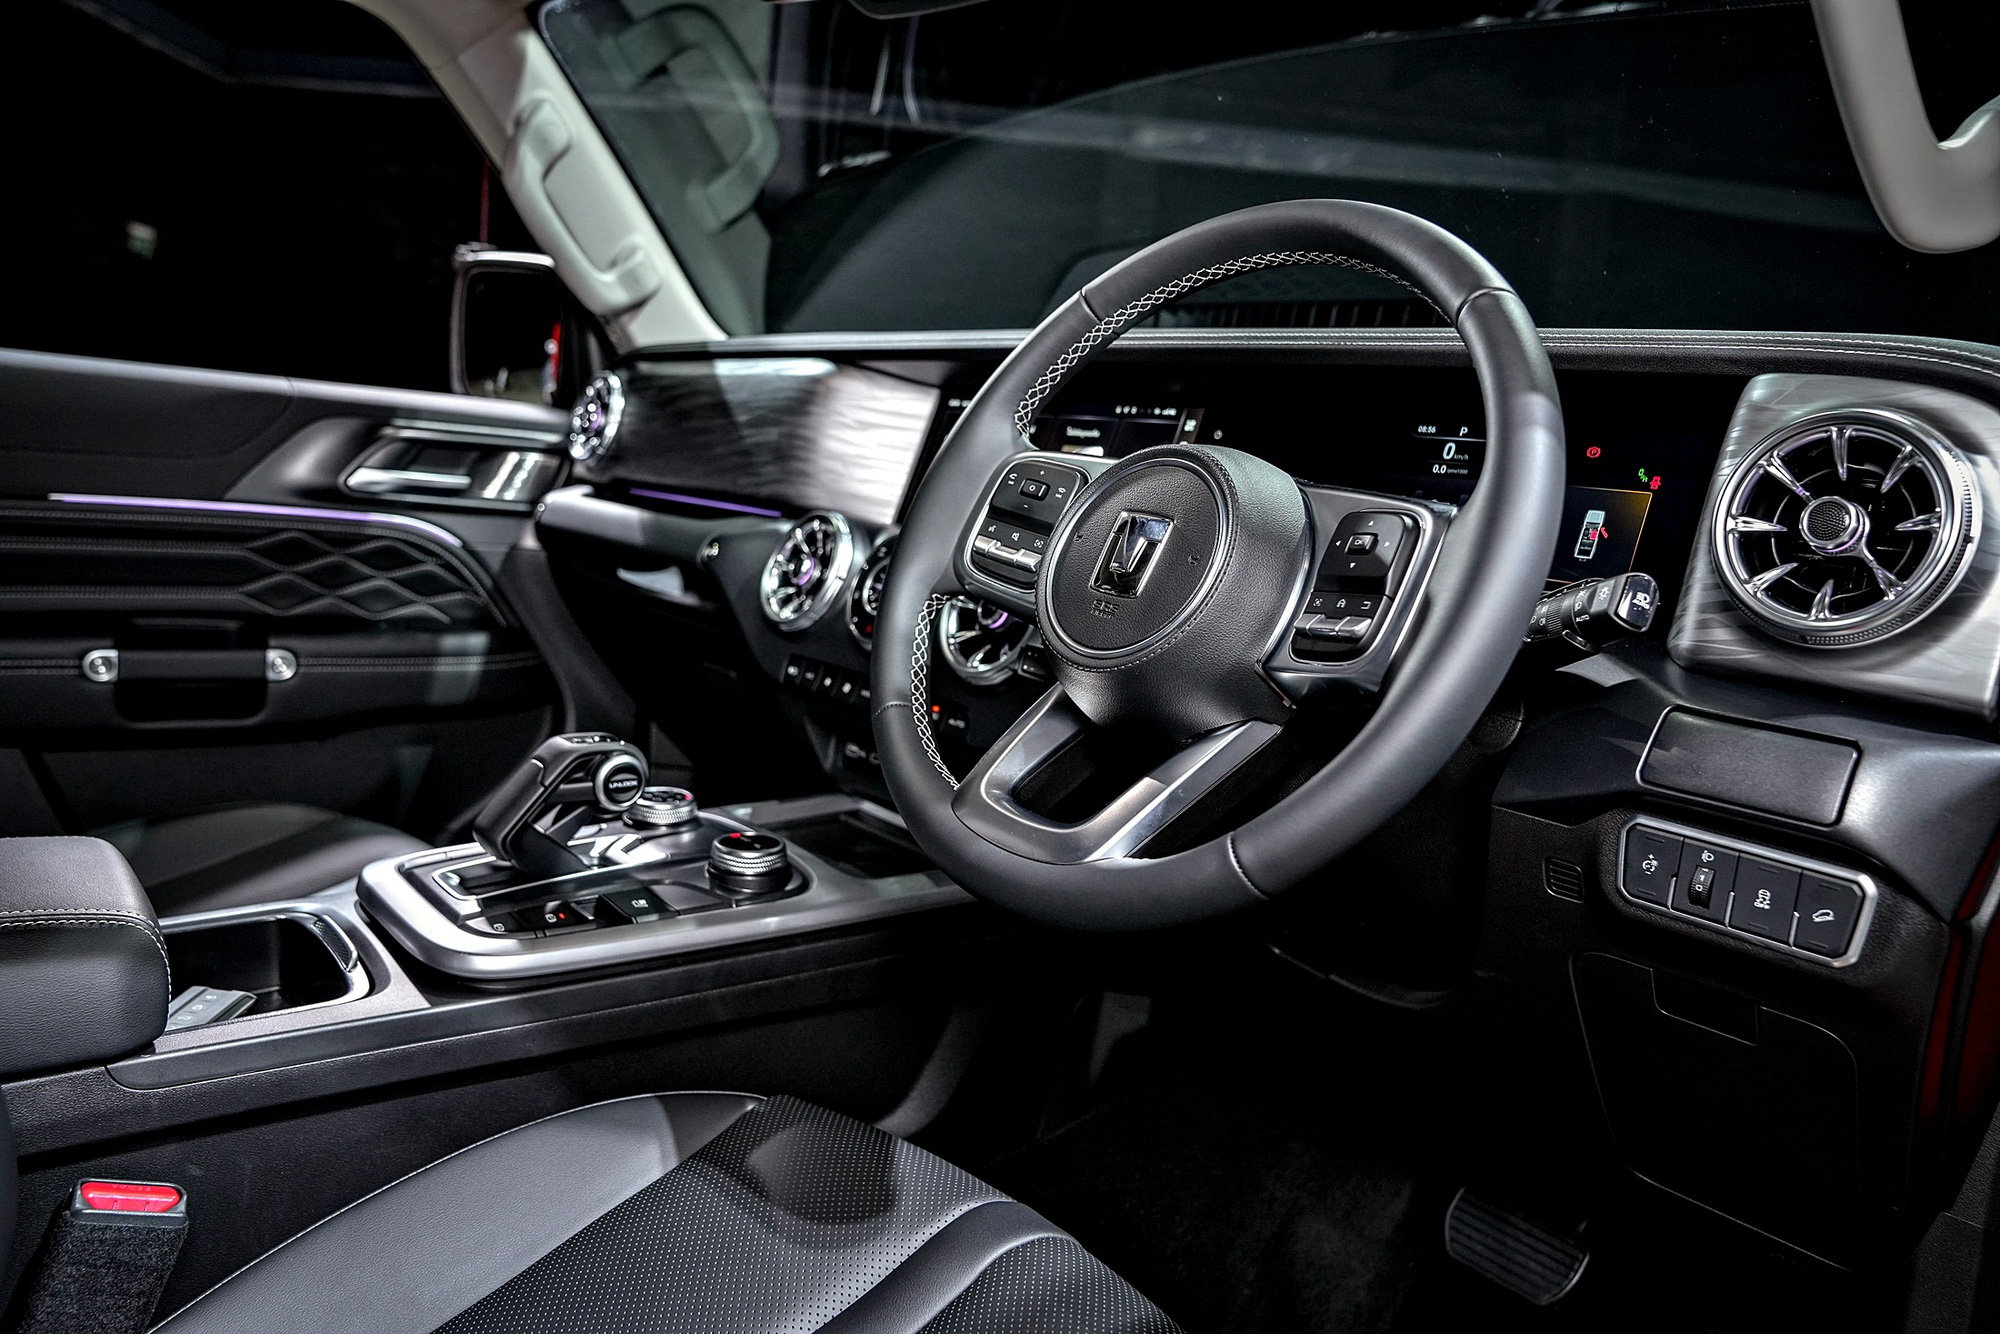 The interior compartment is reminiscent of the Mercedes-AMG G 63. Photo: Autoinfo